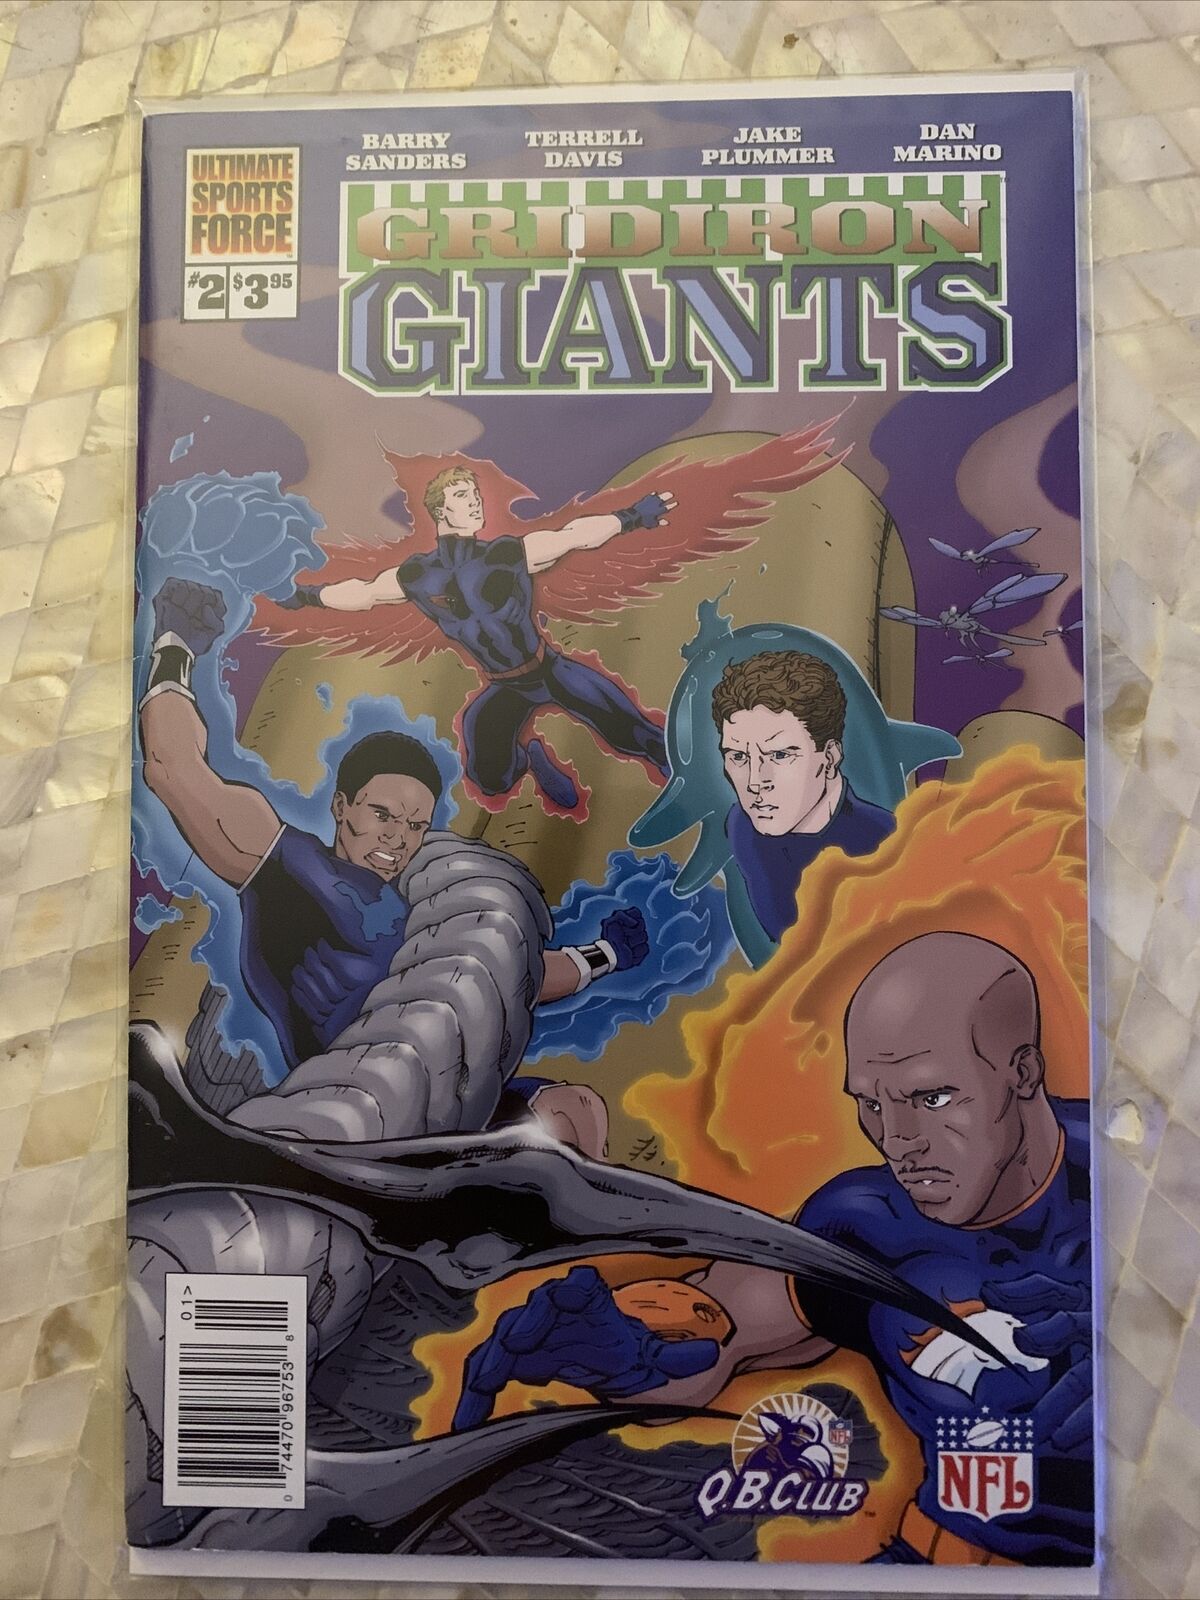 Ultimate Sports Force #2 Football Comic Book Gridiron Giants - Brand New